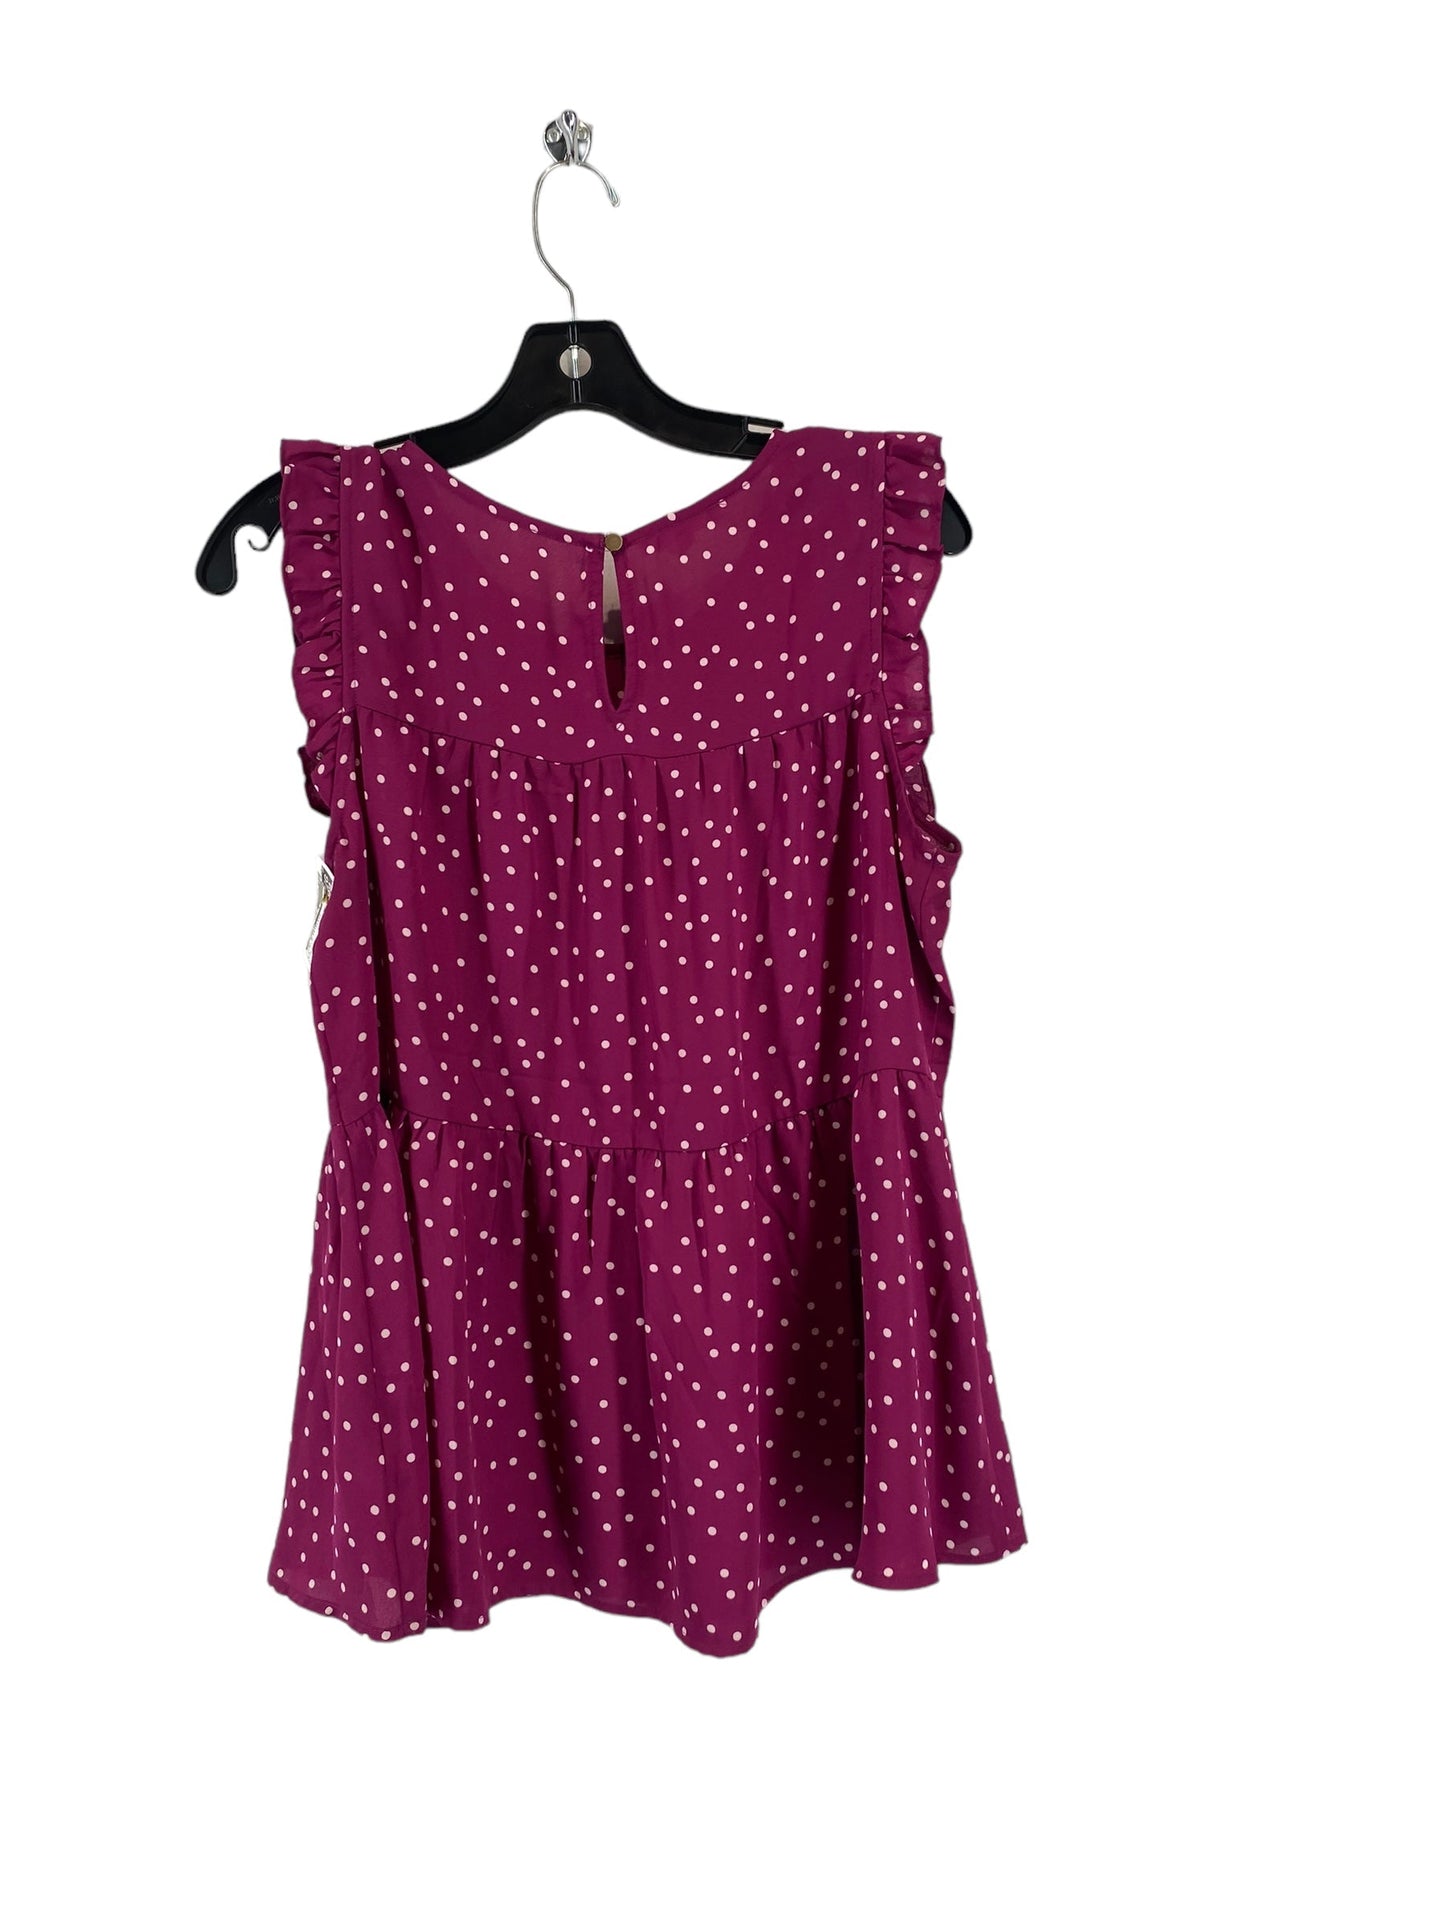 Purple Top Sleeveless Maurices, Size M